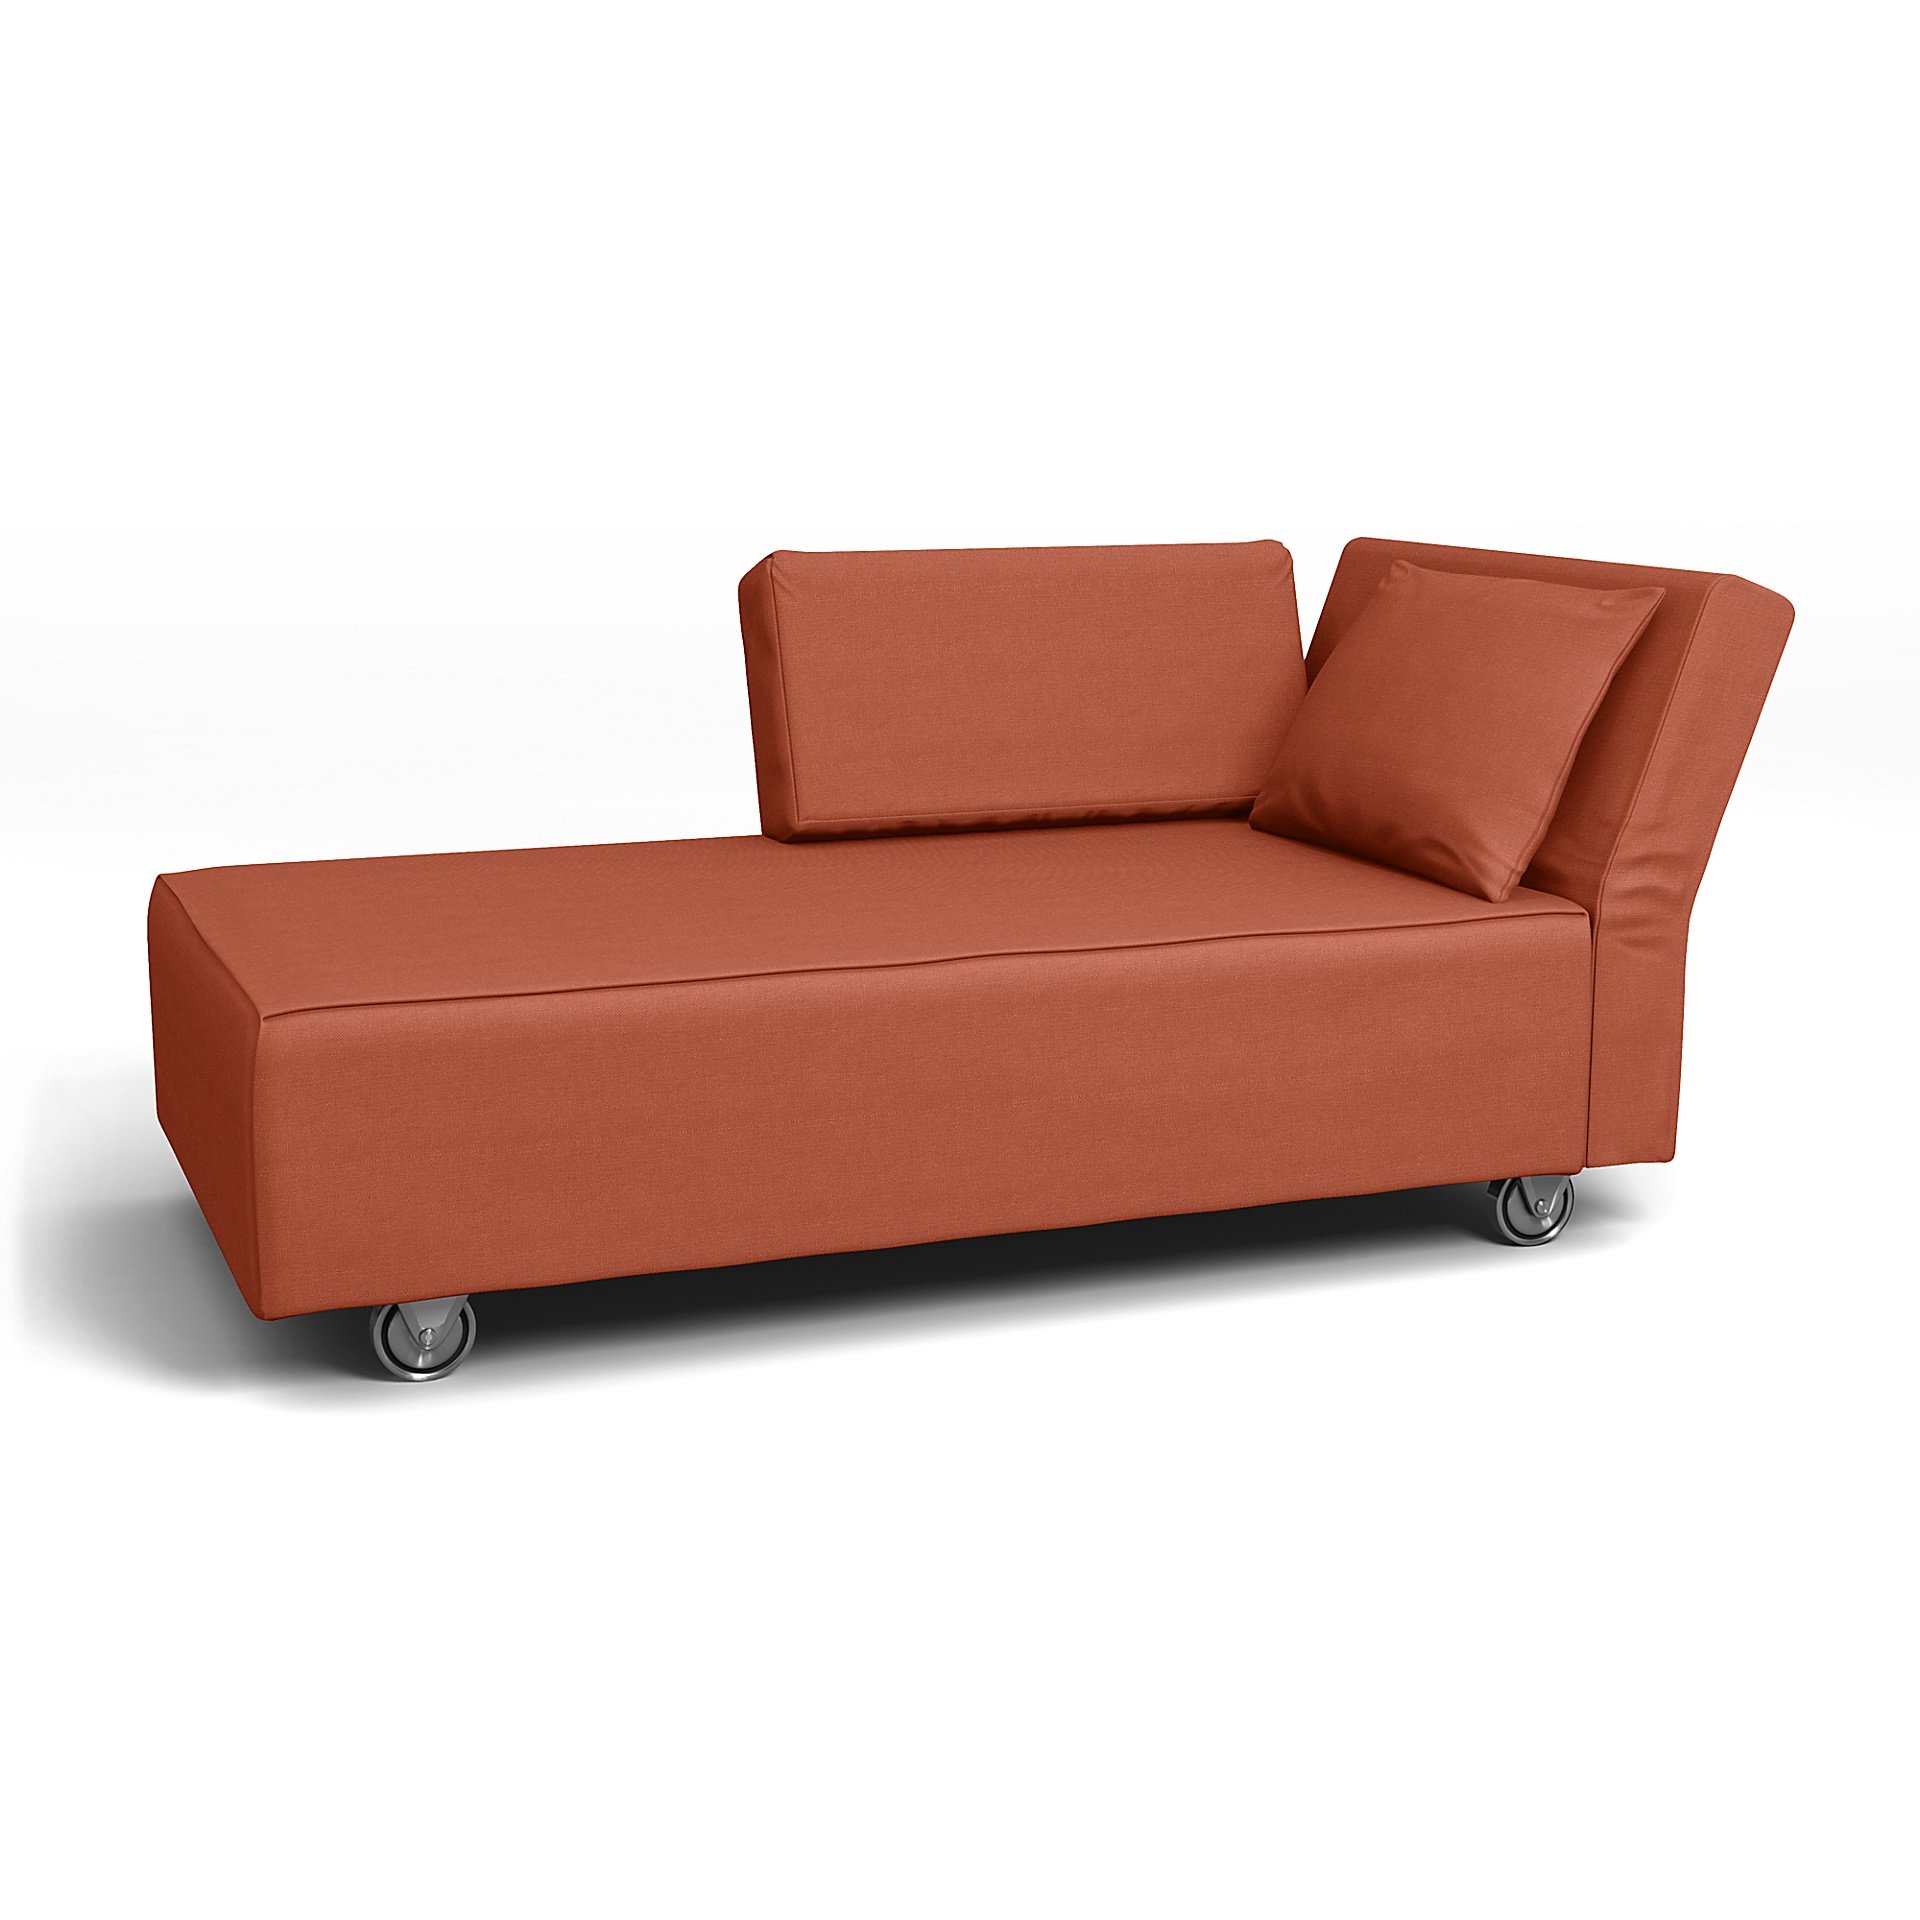 IKEA - Falsterbo Chaise with Right Armrest Cover, Burnt Orange, Linen - Bemz